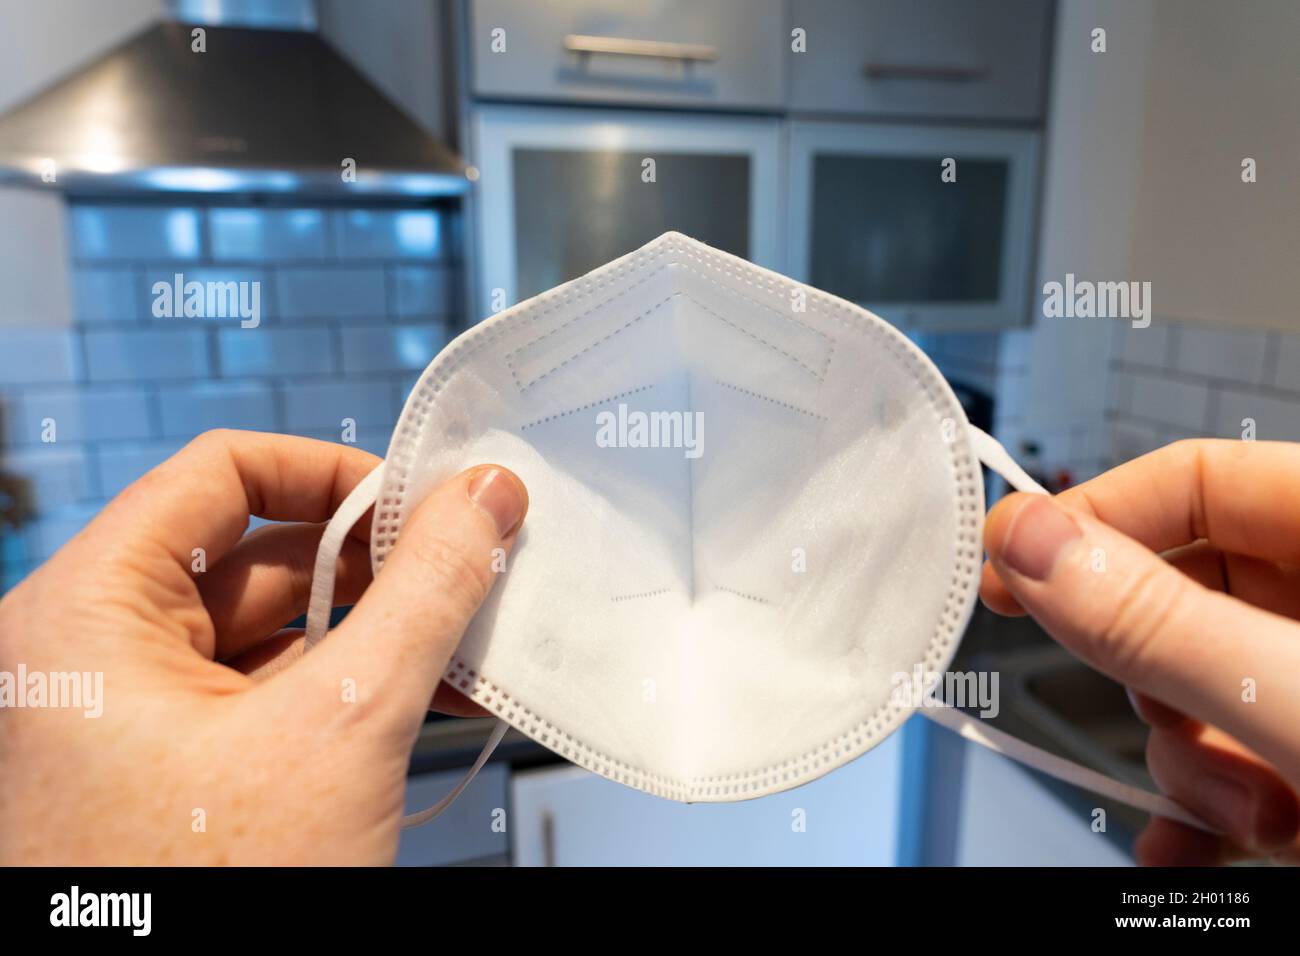 A man holding a face mask about to put it over his face at home for Covid-19 Coronavirus, seen from his POV (point of view). England Stock Photo